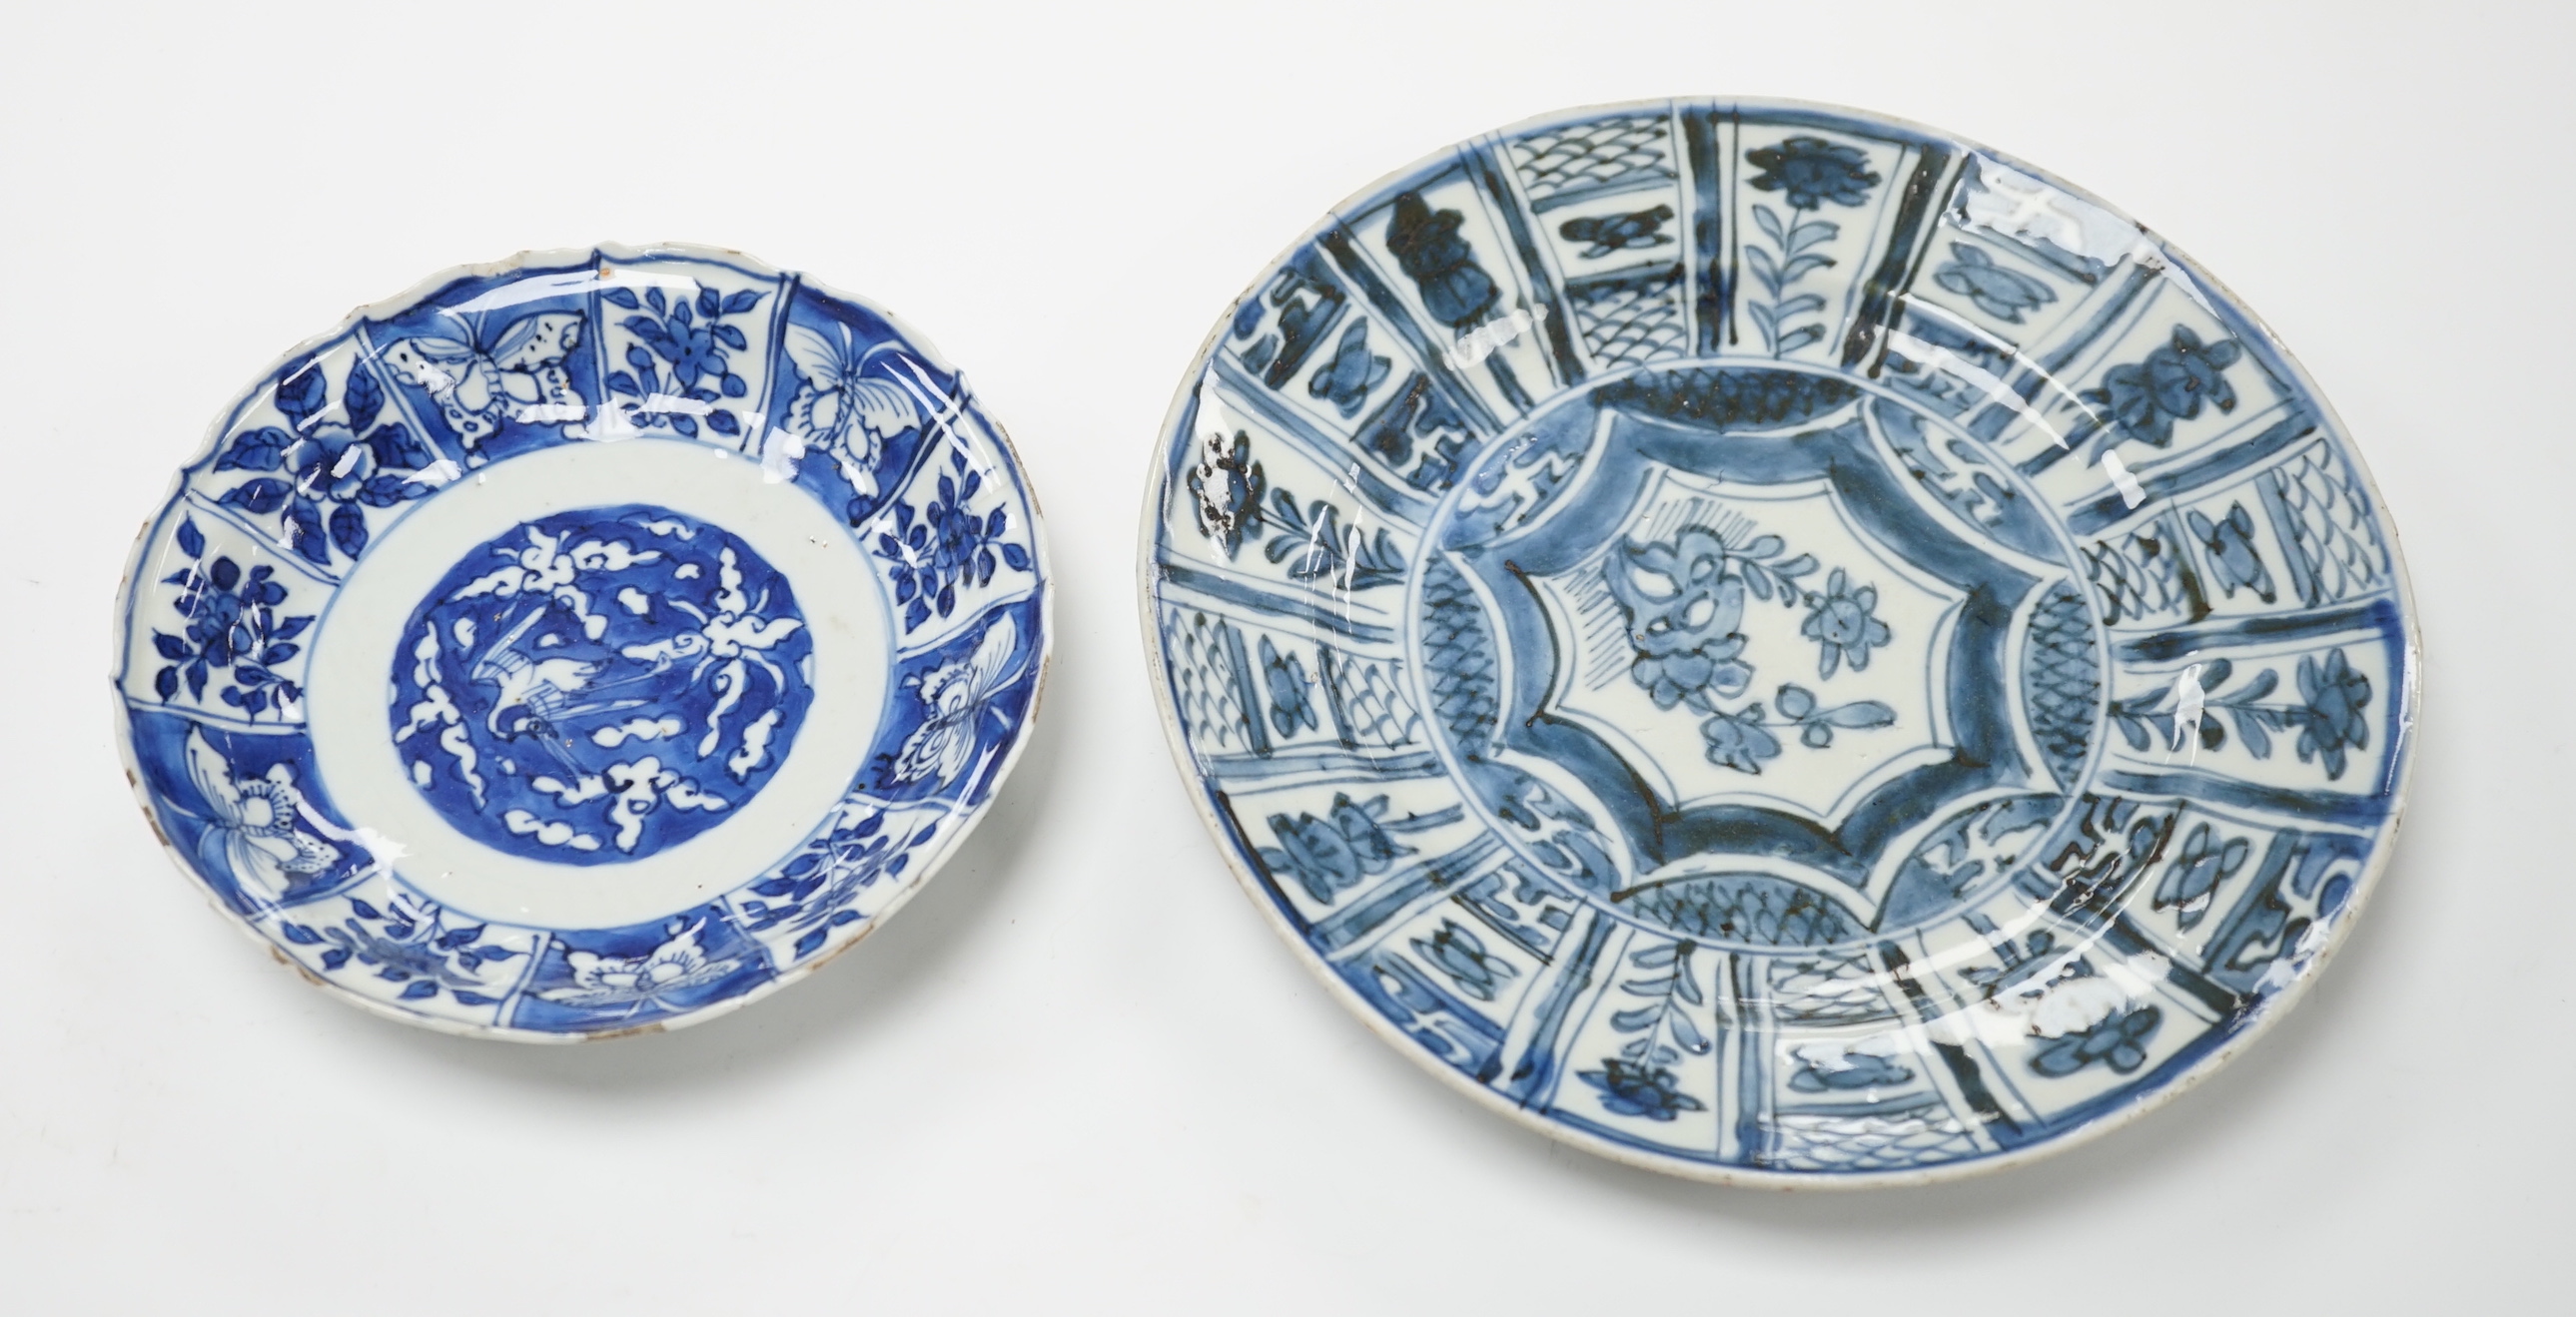 A Chinese 'Kraak porselein' blue and white plate and a Wanli blue and white saucer dish, largest 22cm diameter